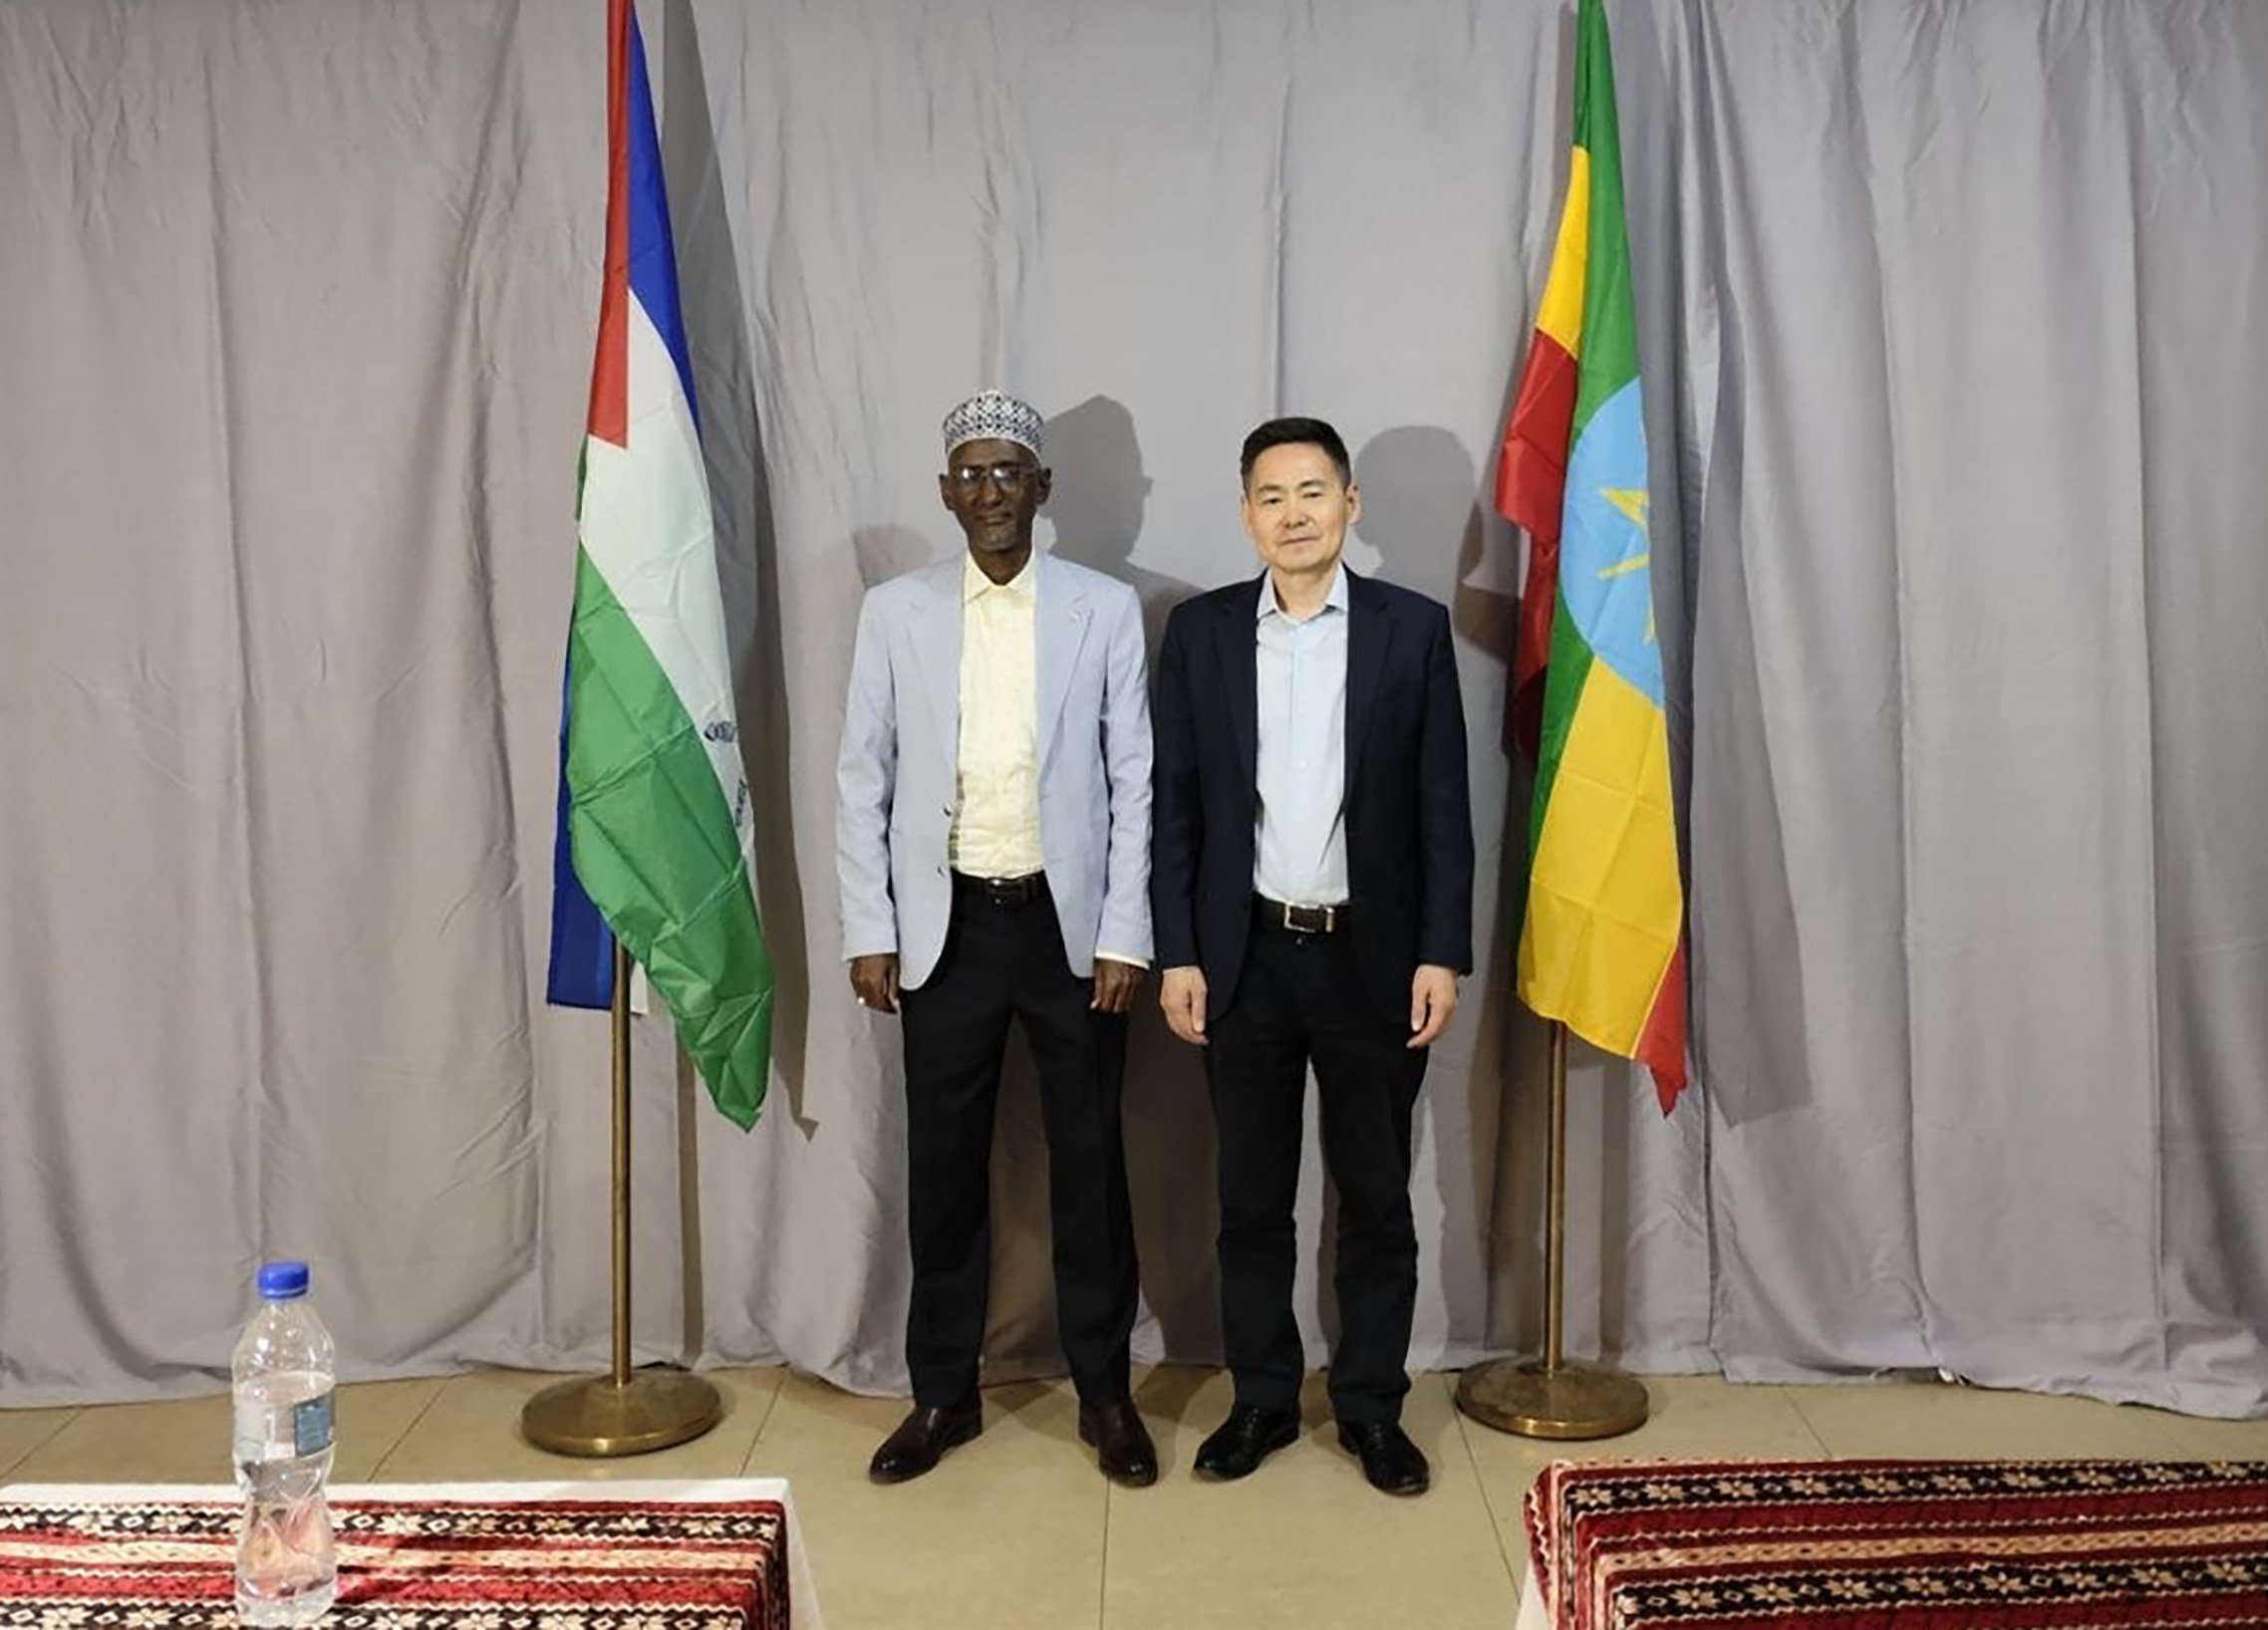 Chinese special envoy for the Horn of Africa Xue Bing  (right) meets Awol Arba, president of Afar regional state in northern Ethiopia, one of the areas most affected by the Tigray conflict. Photo: Handout